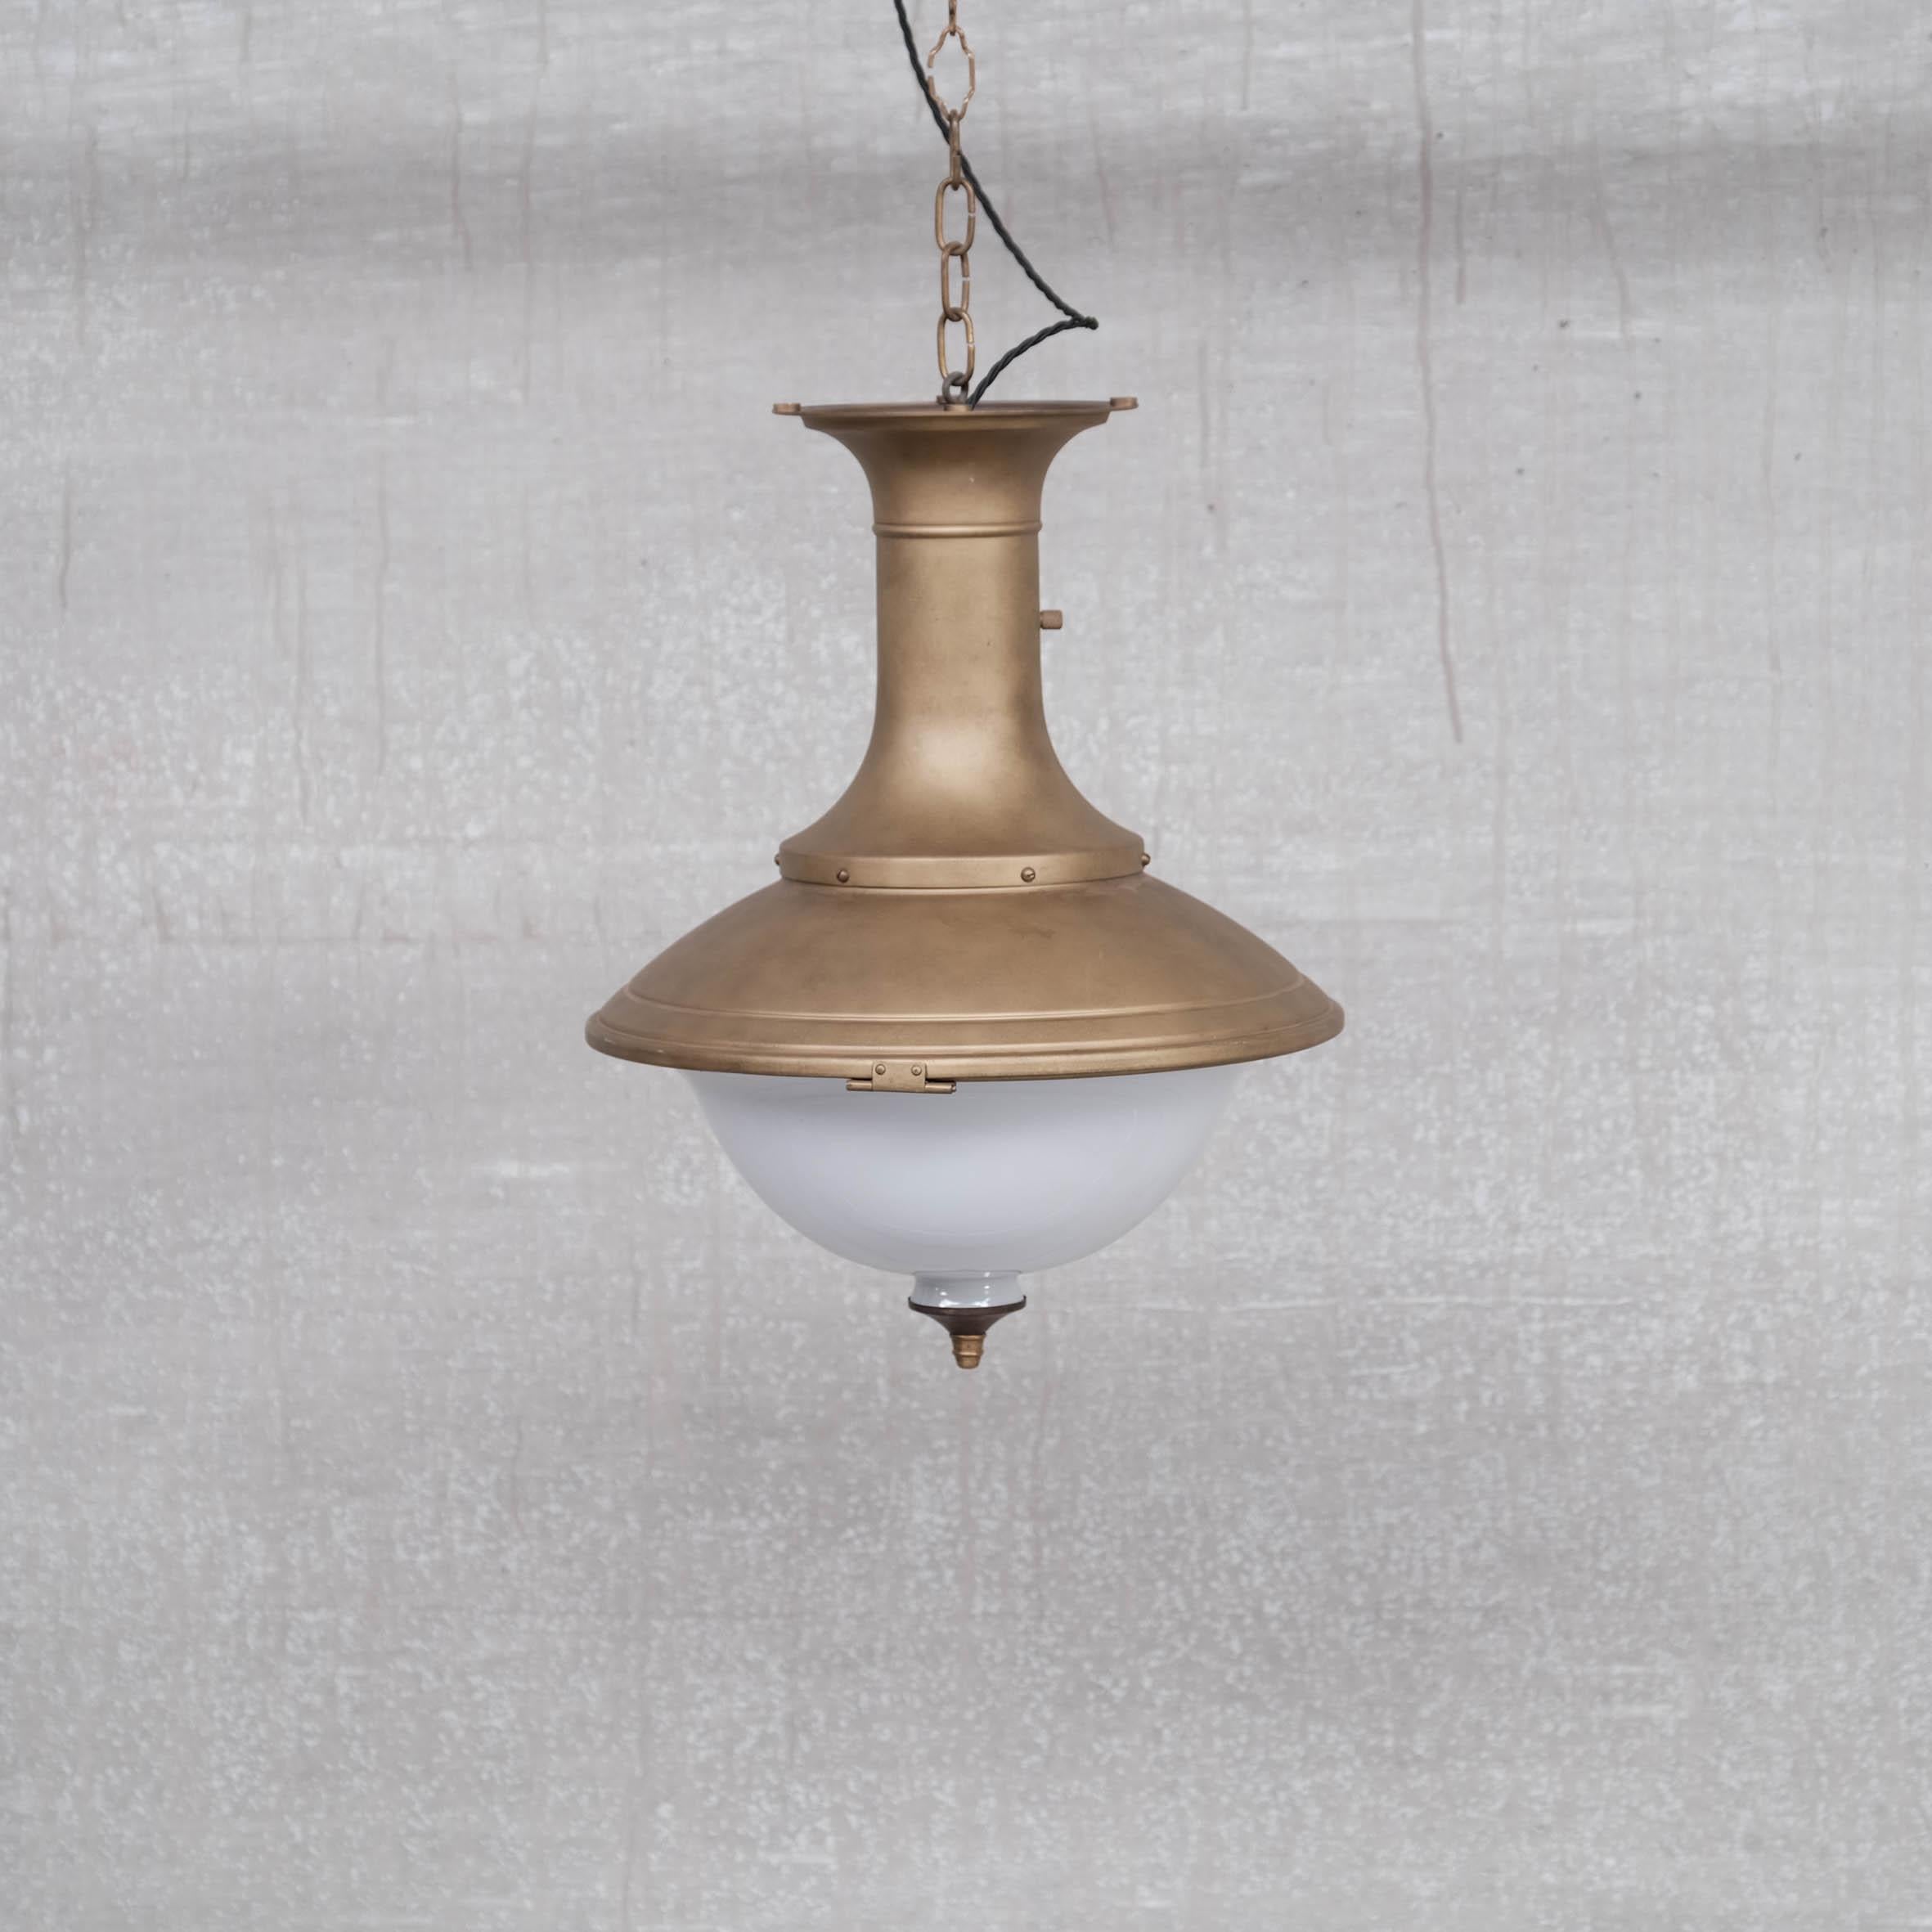 A pair of large brass pendants with opaline glass base, terminating in a brass finial. 

Holland, c1950s.

Heavy and good quality. 

Price is for the pair.

Re-wired and PAT tested. 

No original chain or ceiling rose was retained but